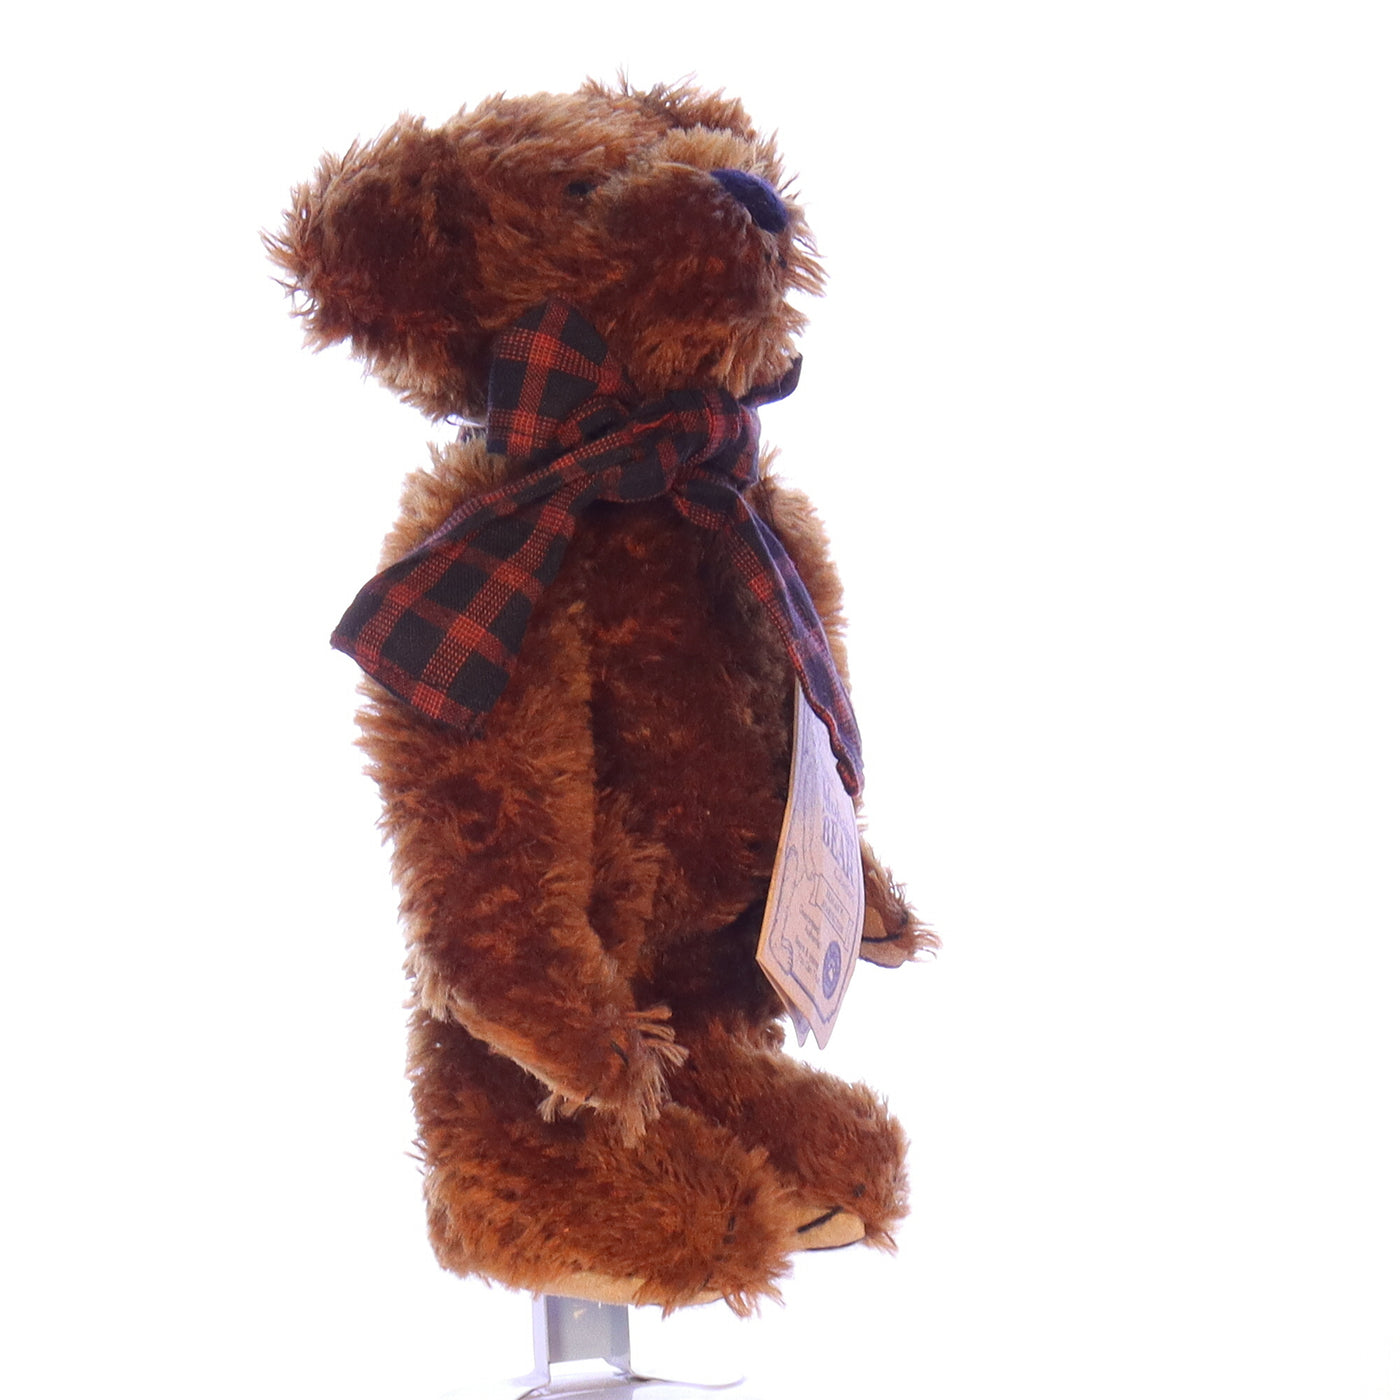 Boyds_Bears_and_Friends_590070-05_Reagan_V_Bearington_The_Original_Mohair_Bear_Collection_Stuffed_Animal_1997 Front Right View